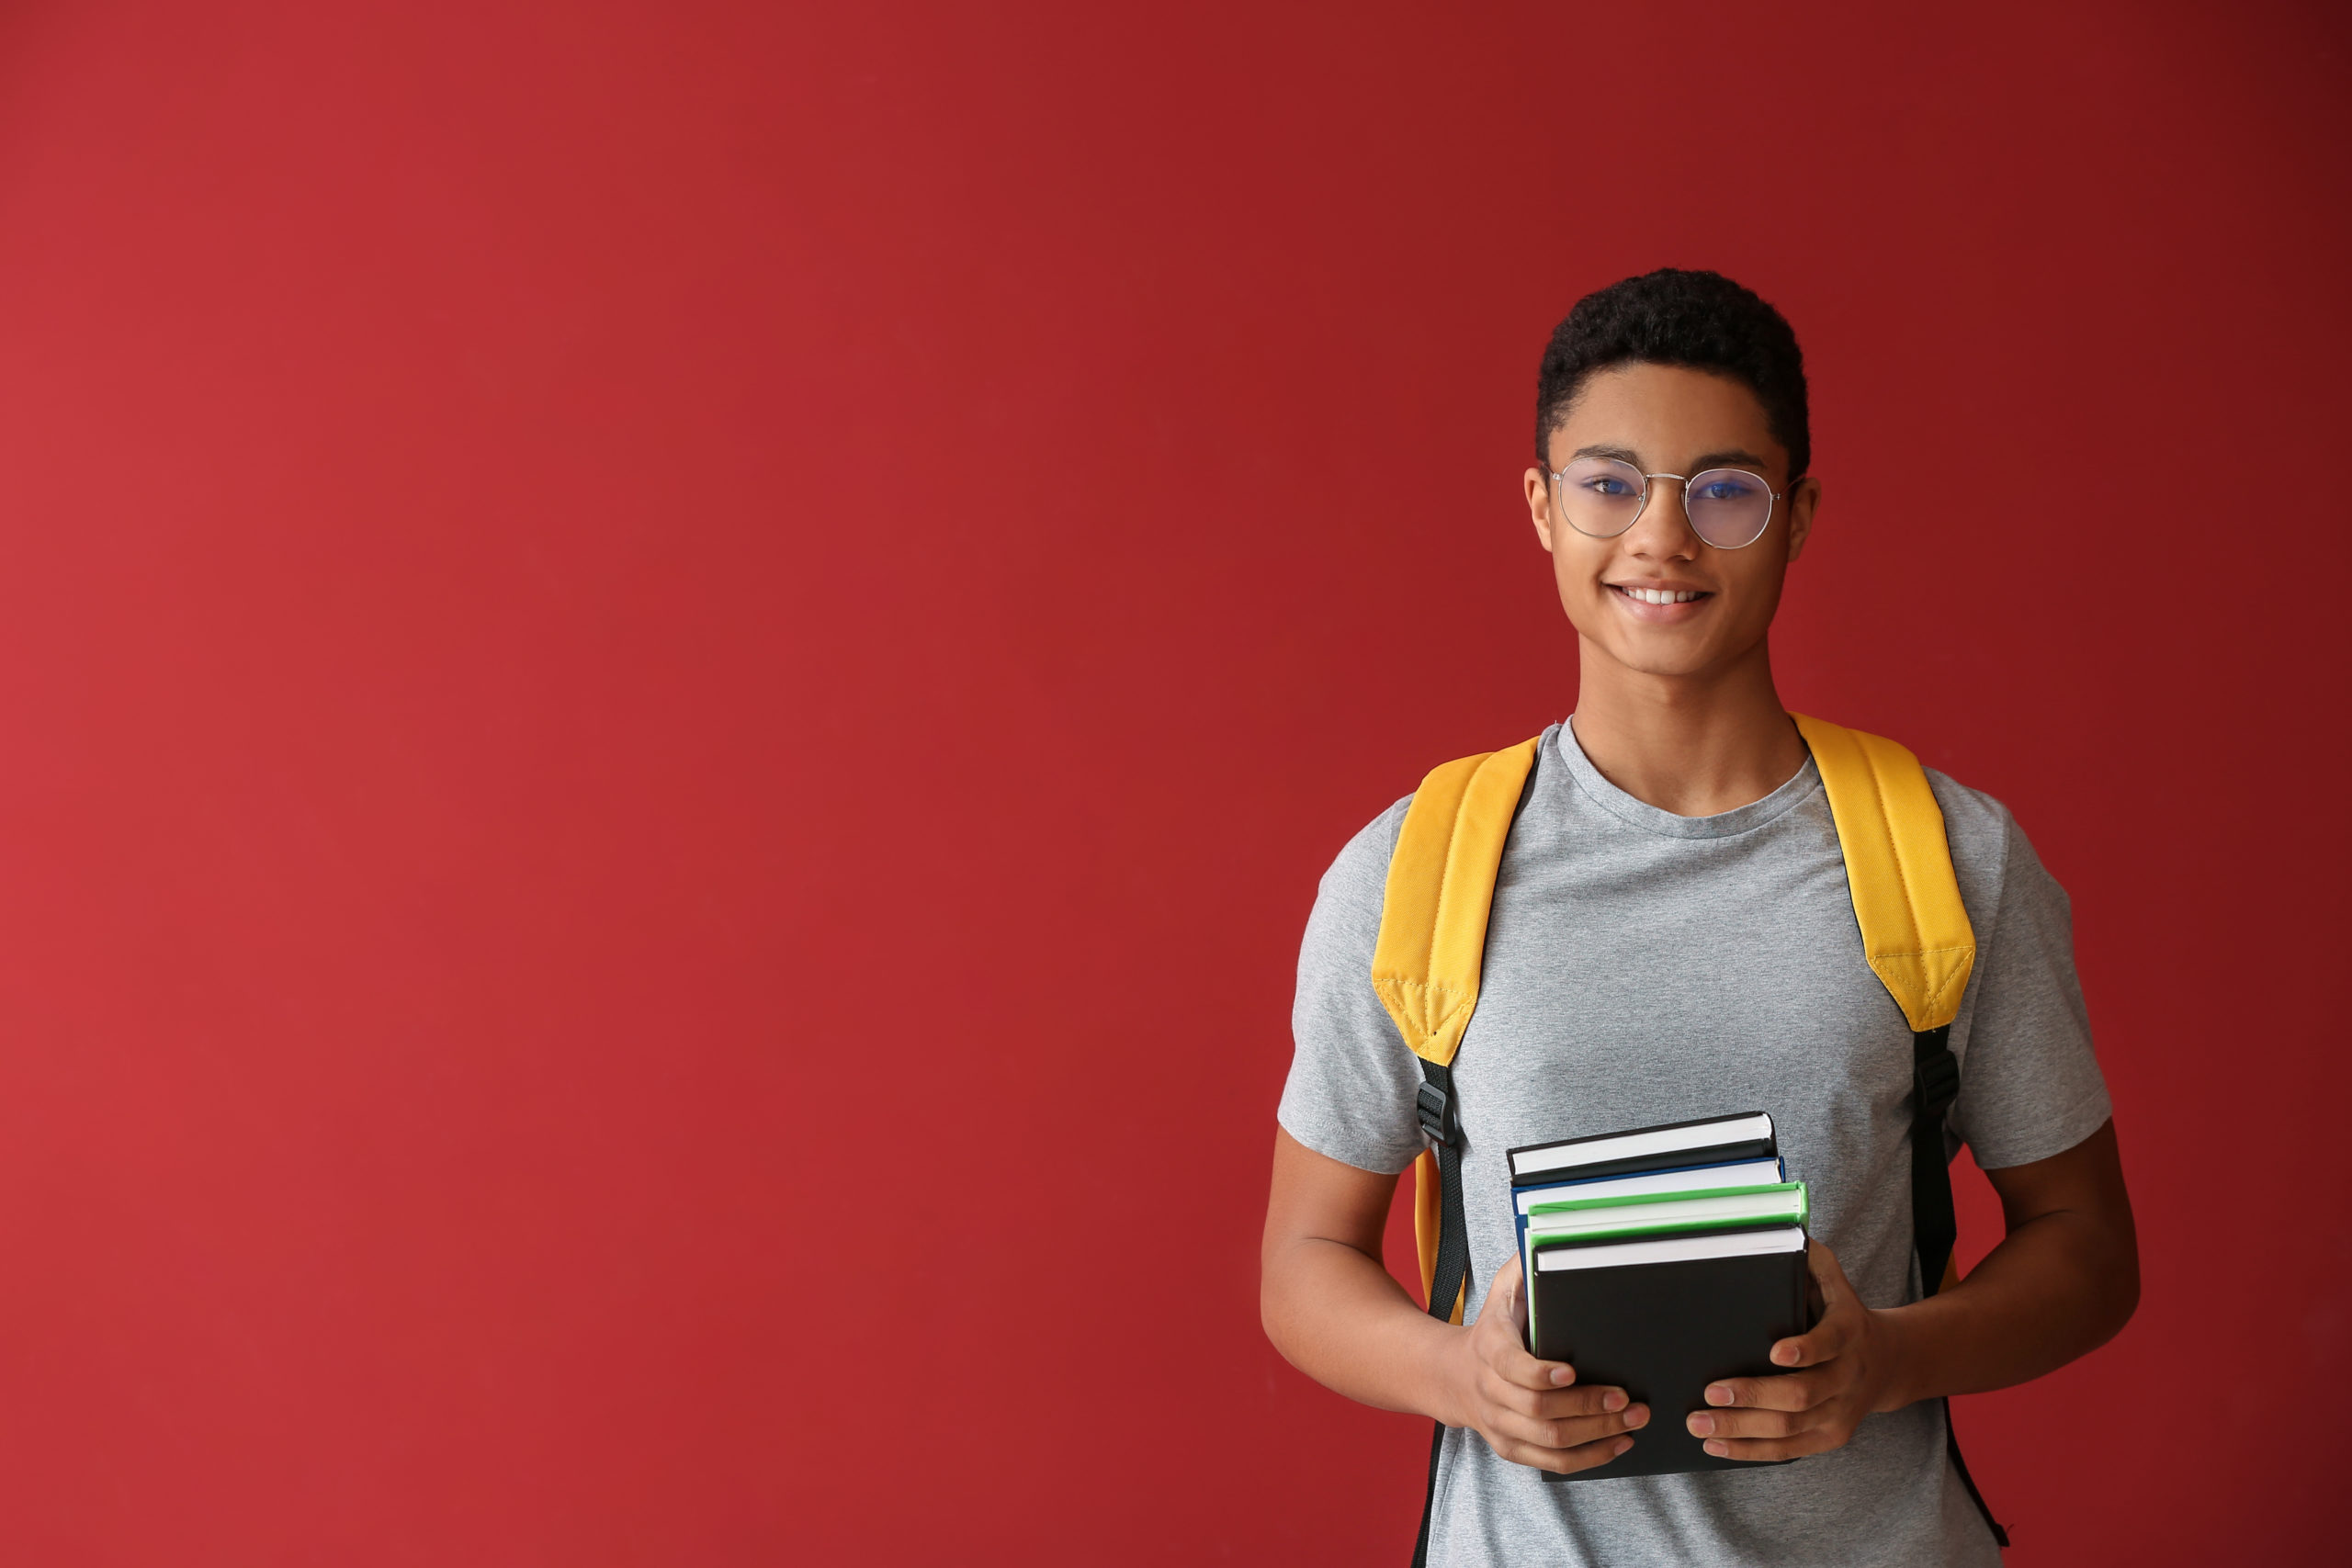 College male Student with glasses, grey shirtholding books . Red background